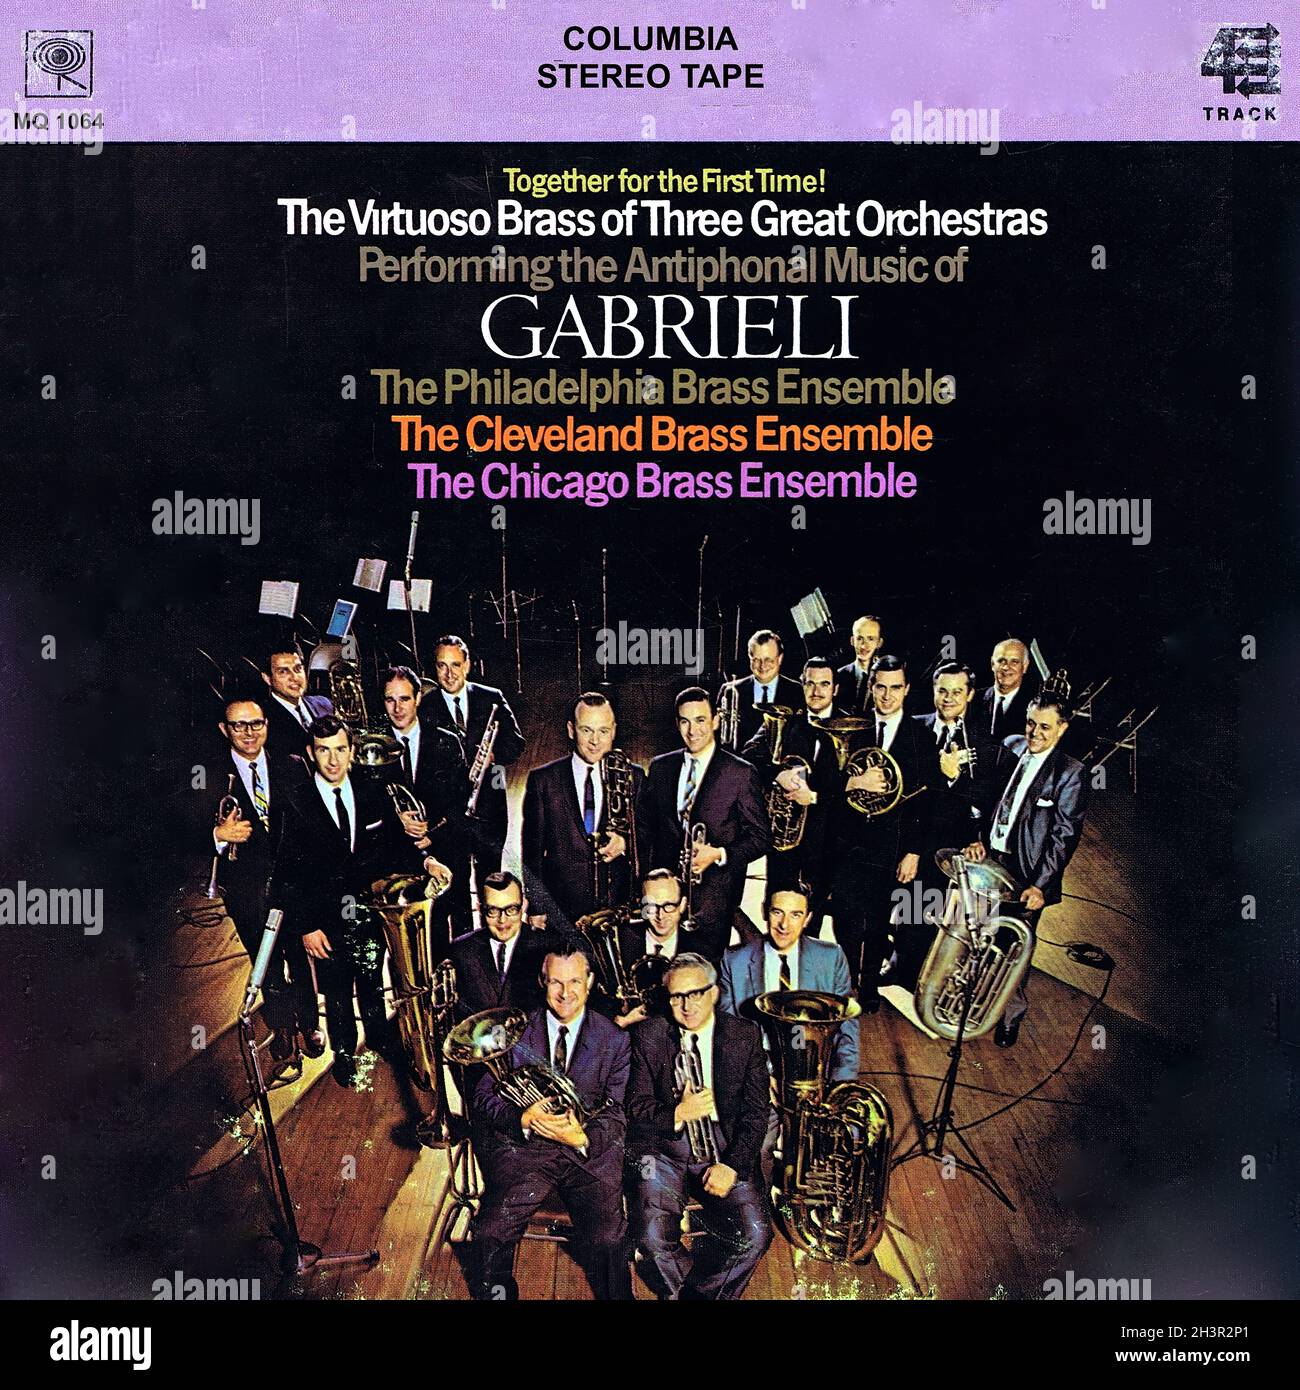 Gabrieli Music for Anphonal Brass - Chicago Cleveland Philadelphia R2R Columbia - Classical Music Vintage Vinyl Record Foto Stock